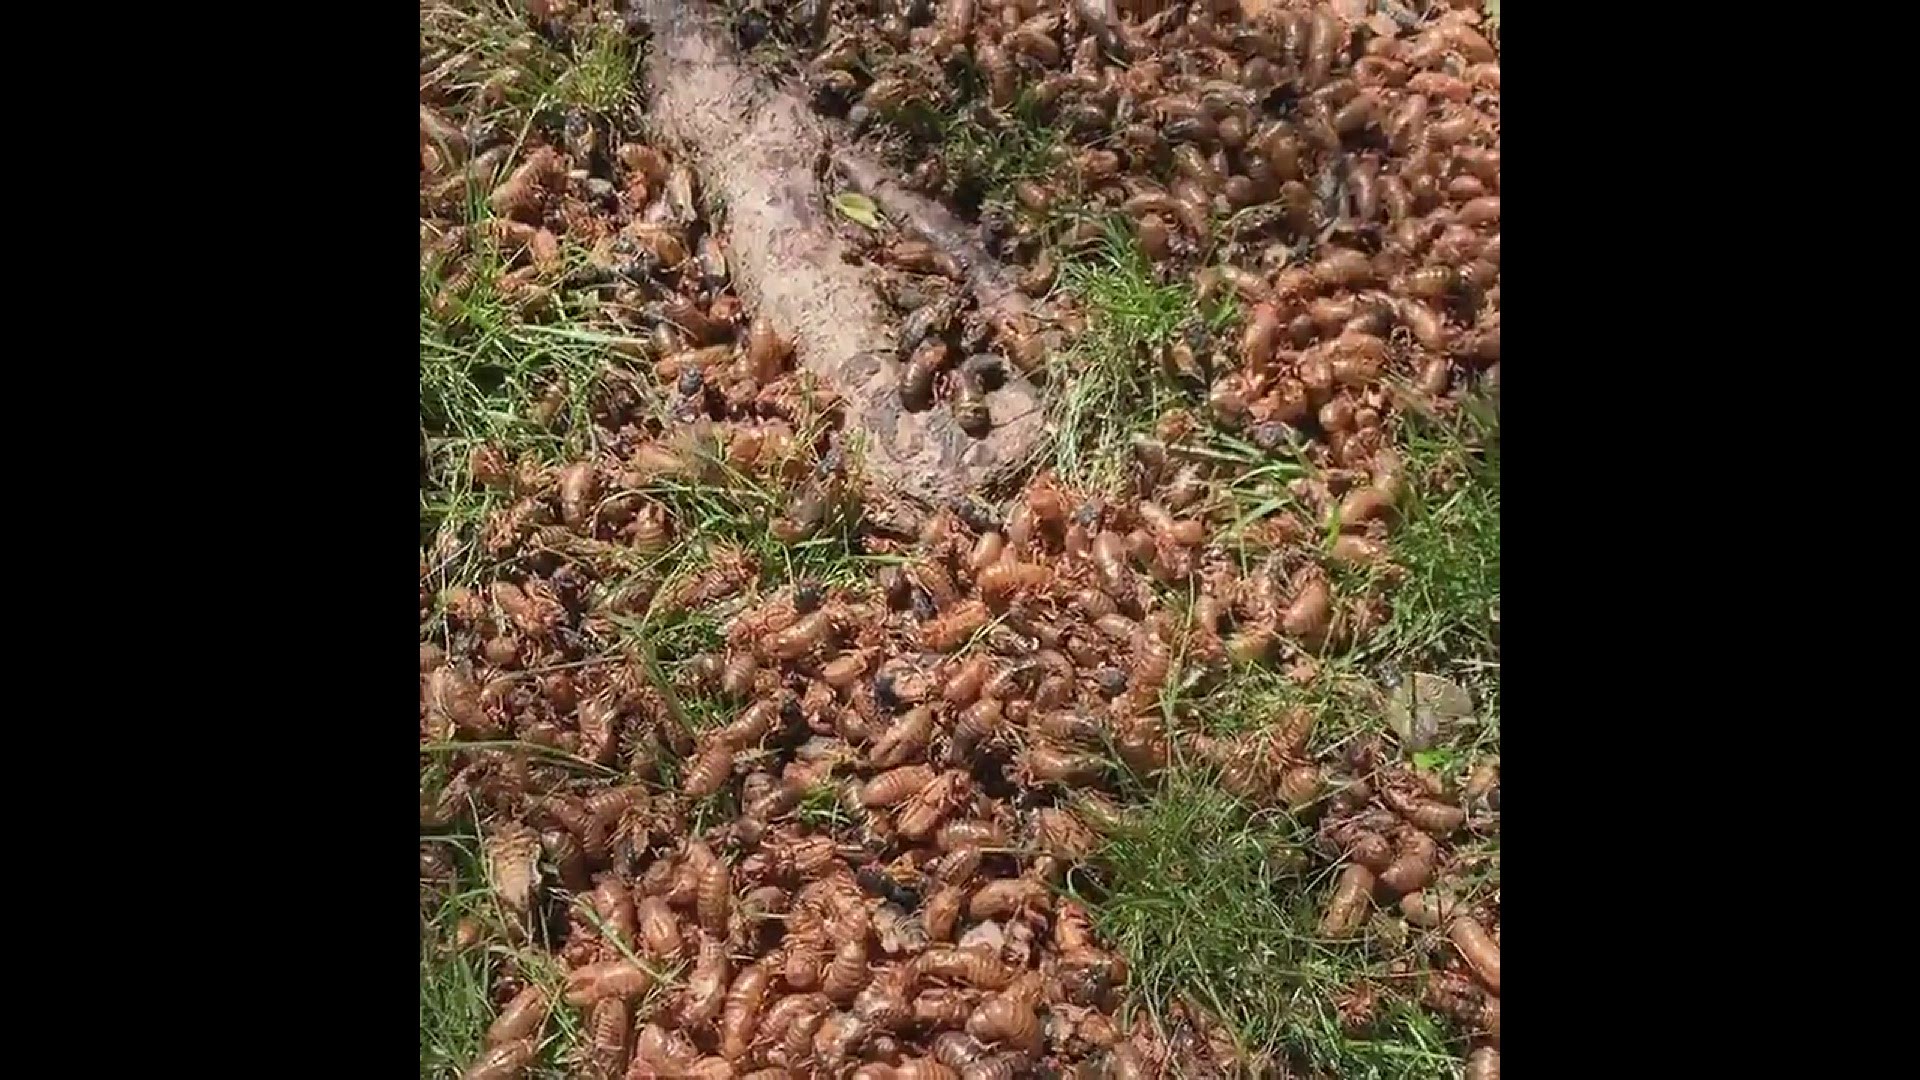 Cicadas have arrived in the DMV